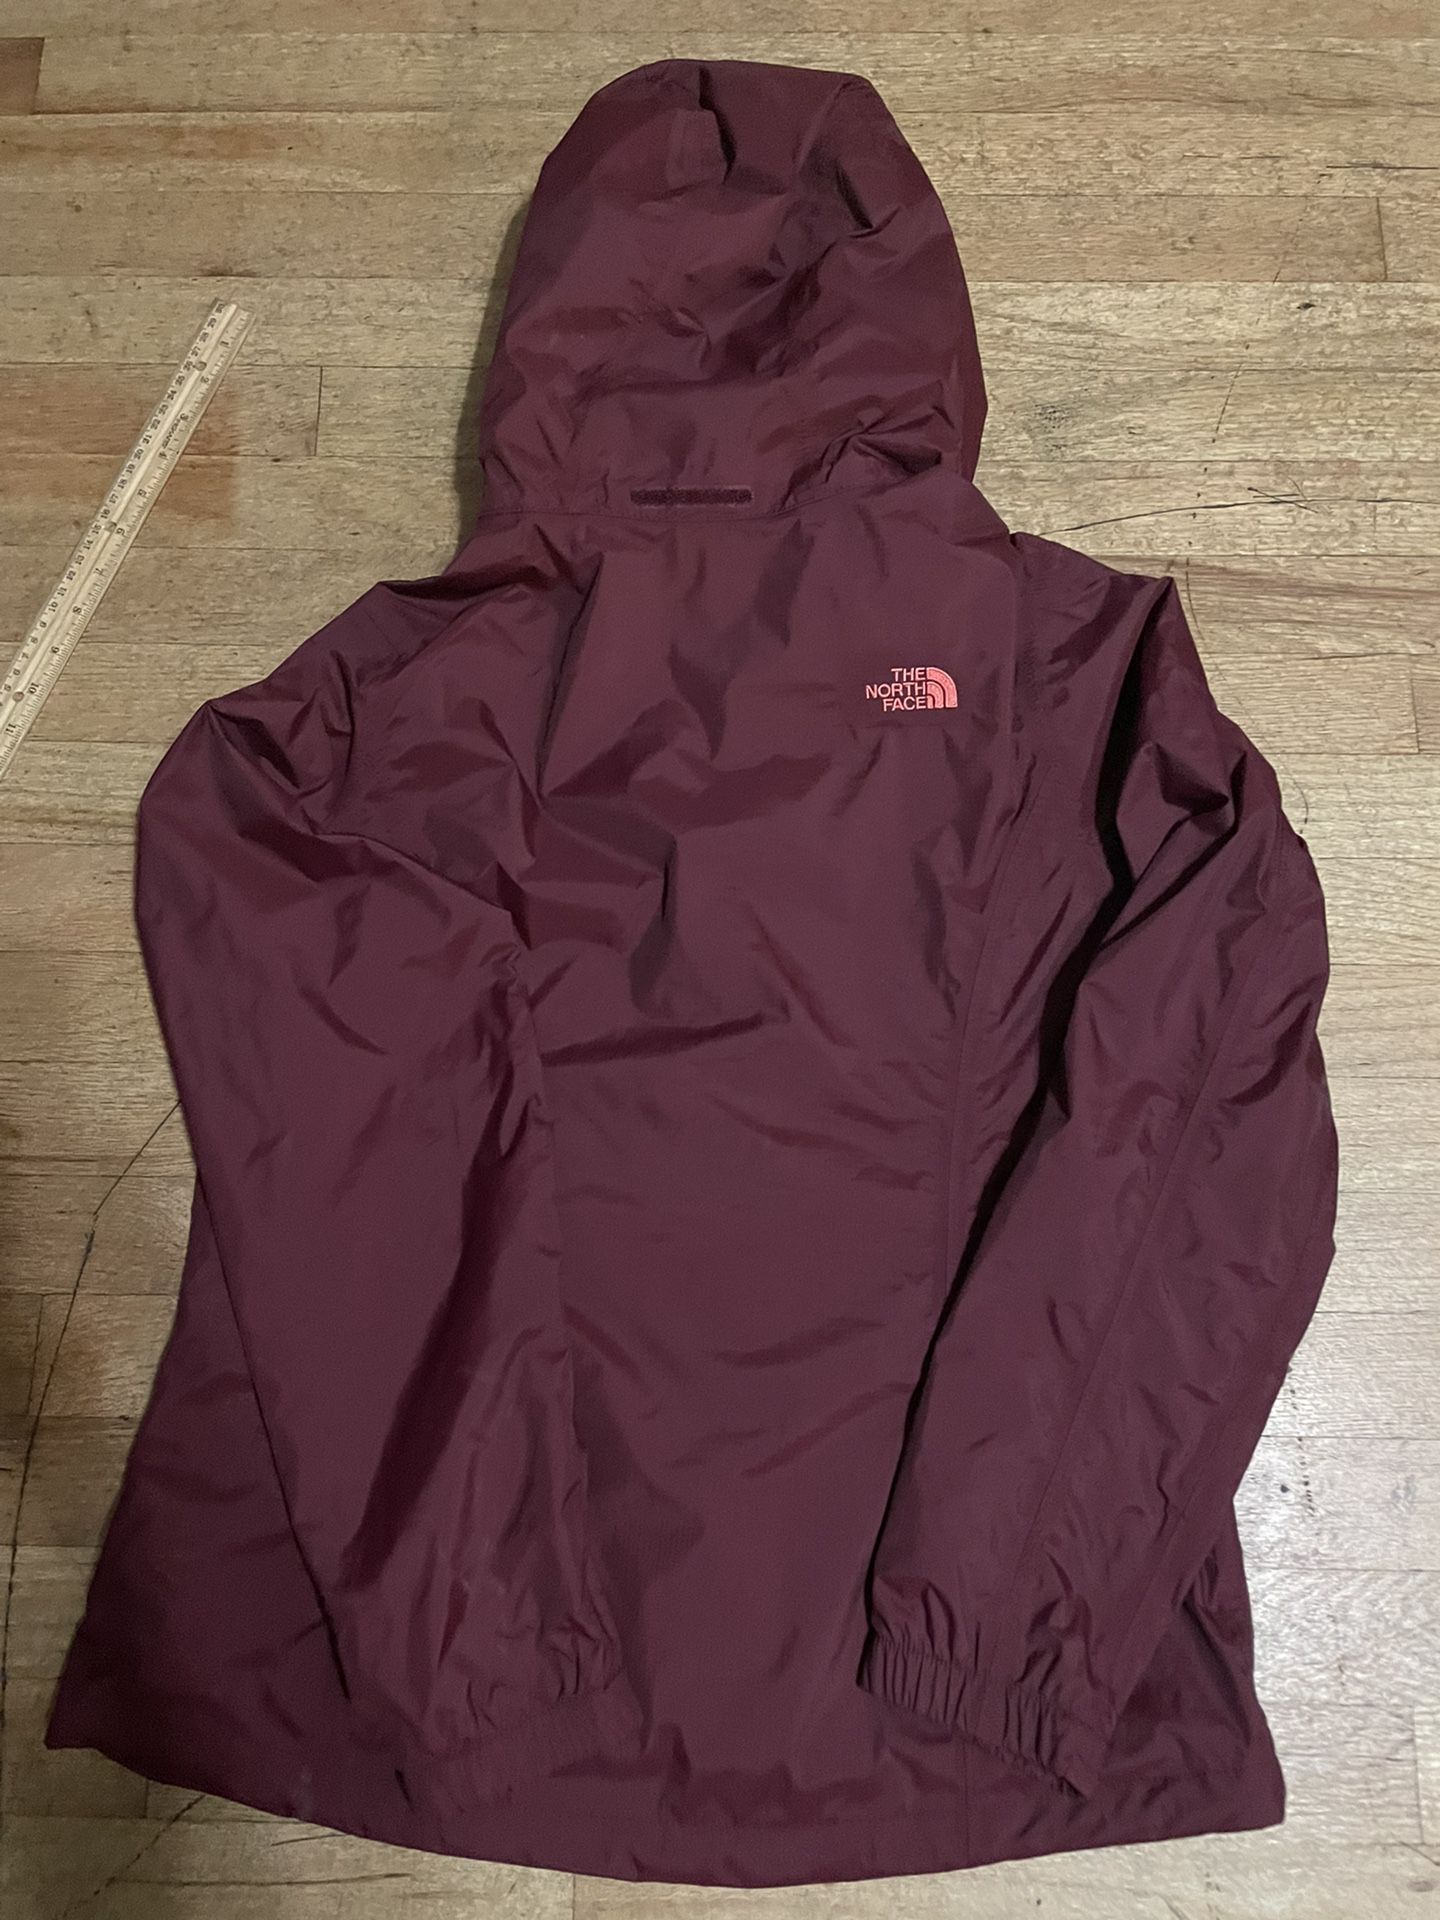 The North Face wind Breaker Jacket For Women’s 